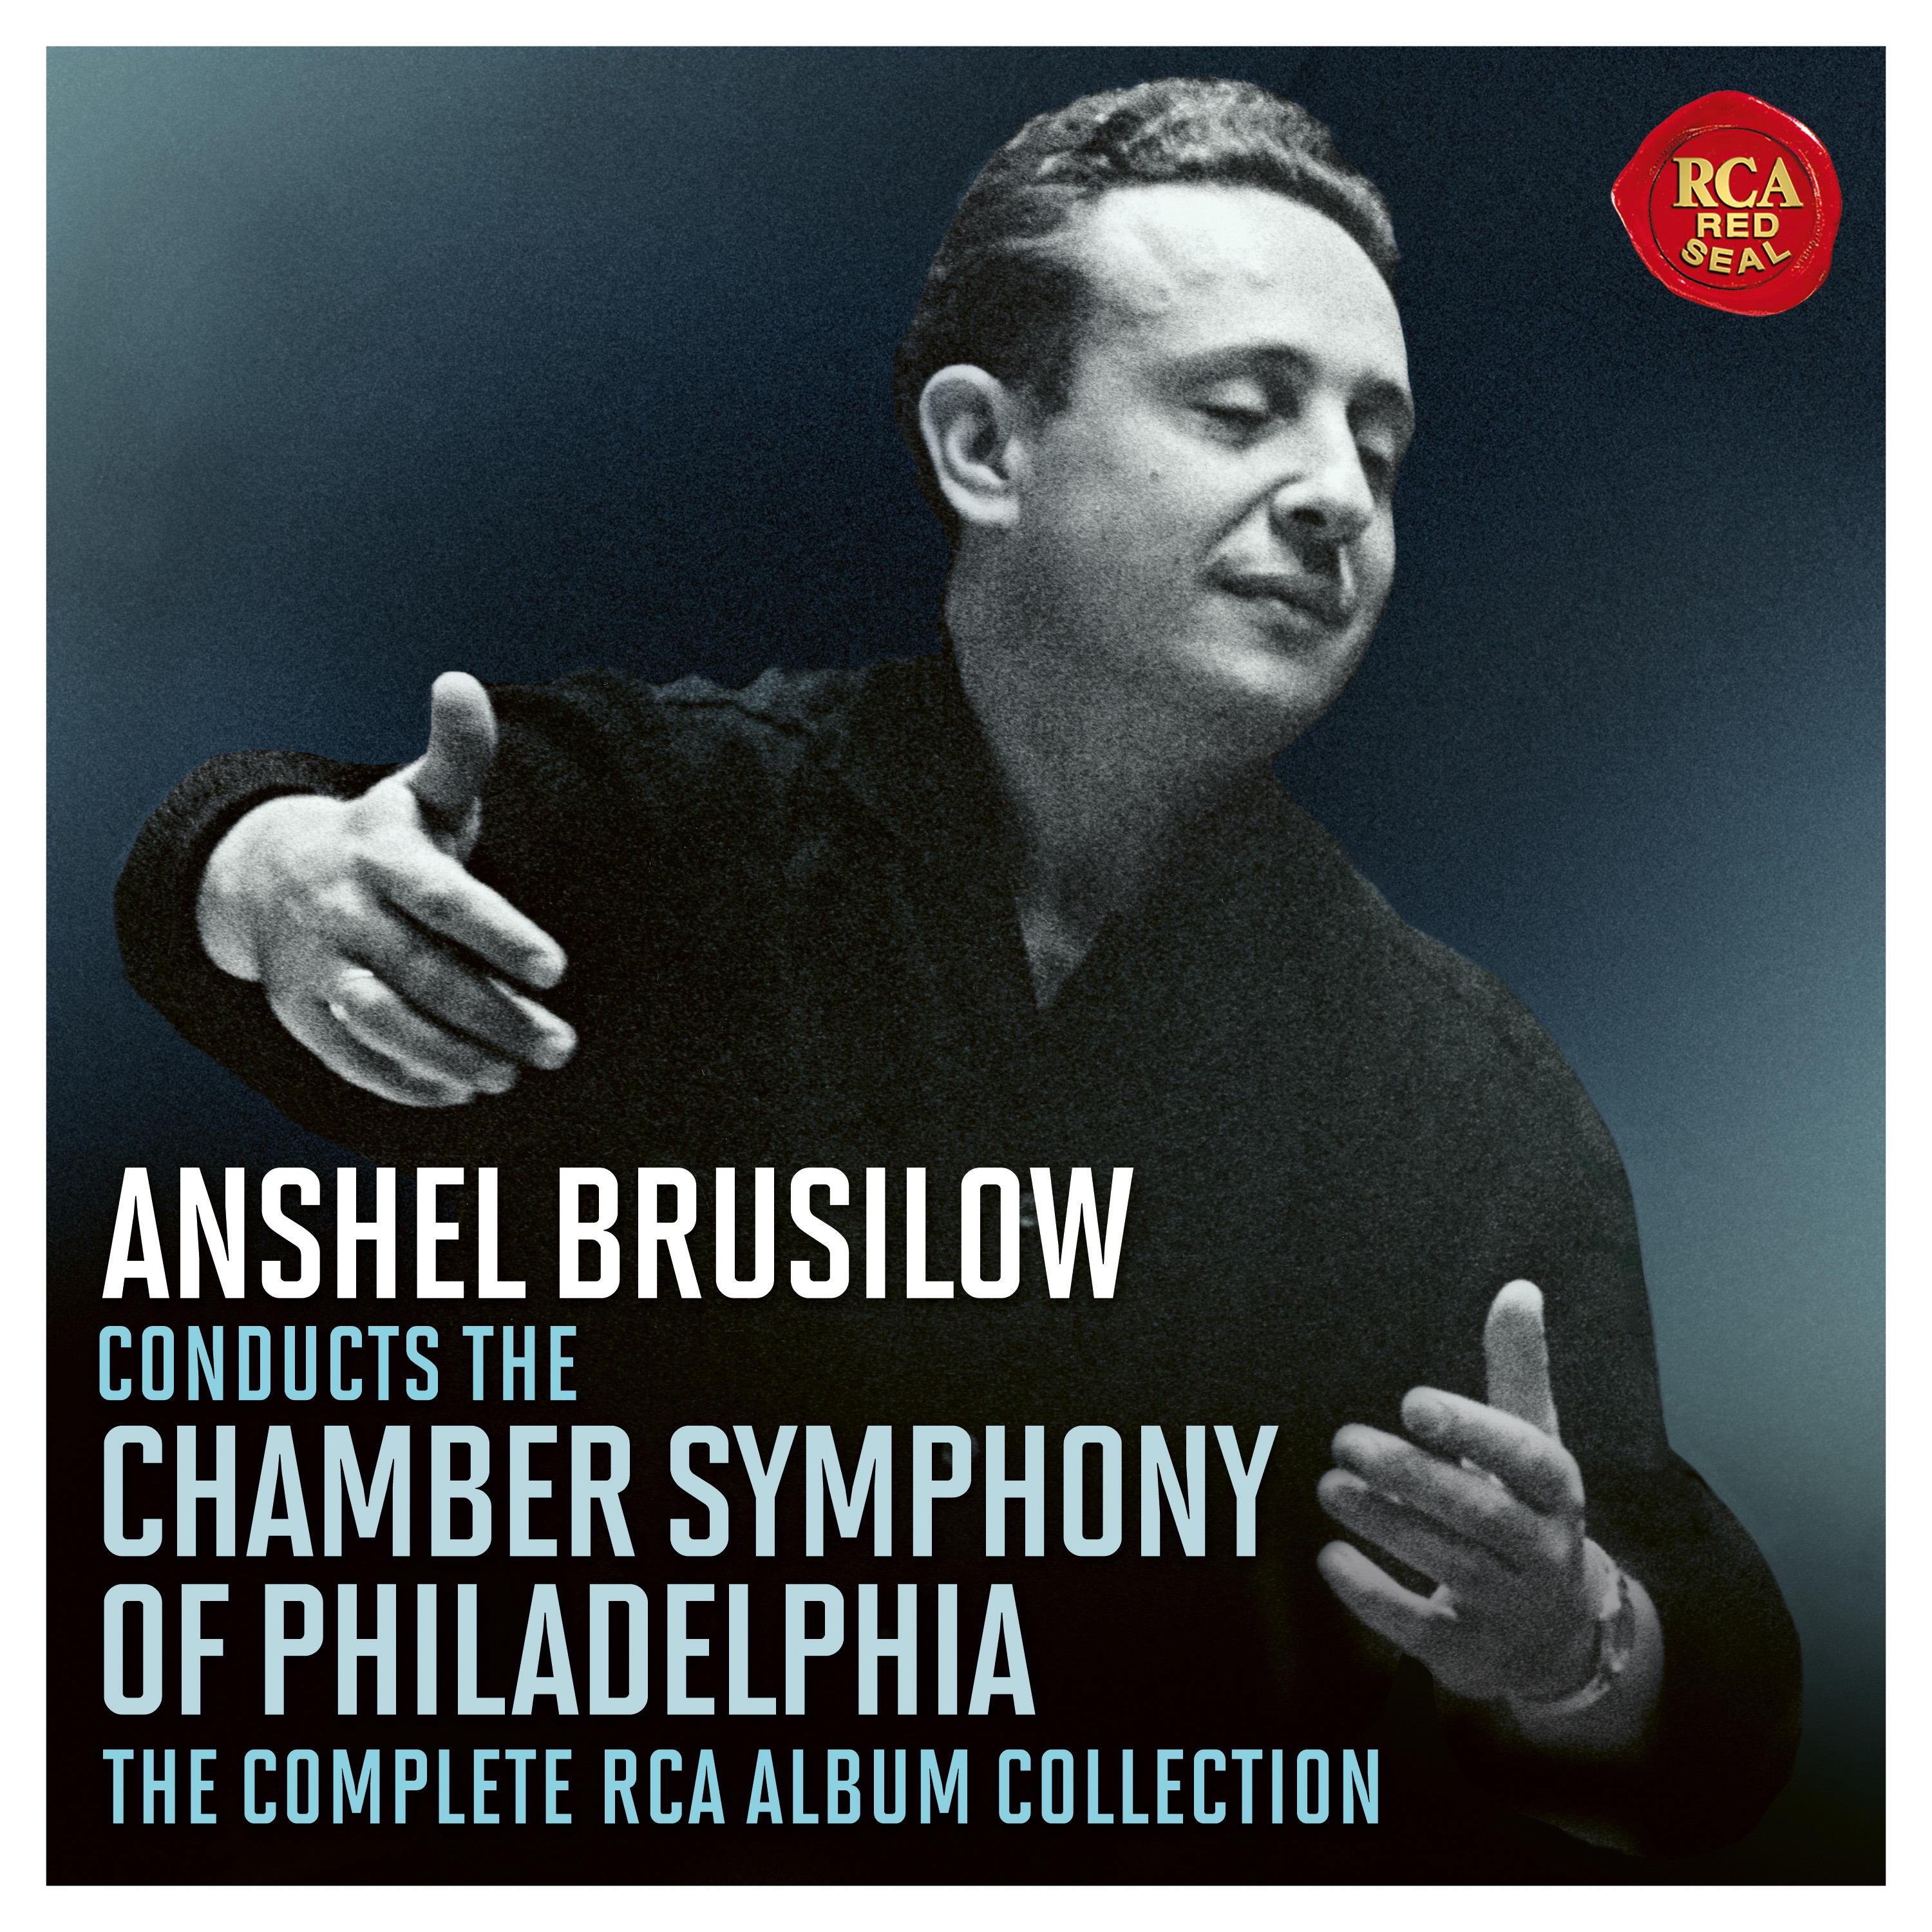 Anshel Brusilow - Anshel Brusilow conducts the Chamber Symphony Of Philadelphia - The Complete RCA Album Collection